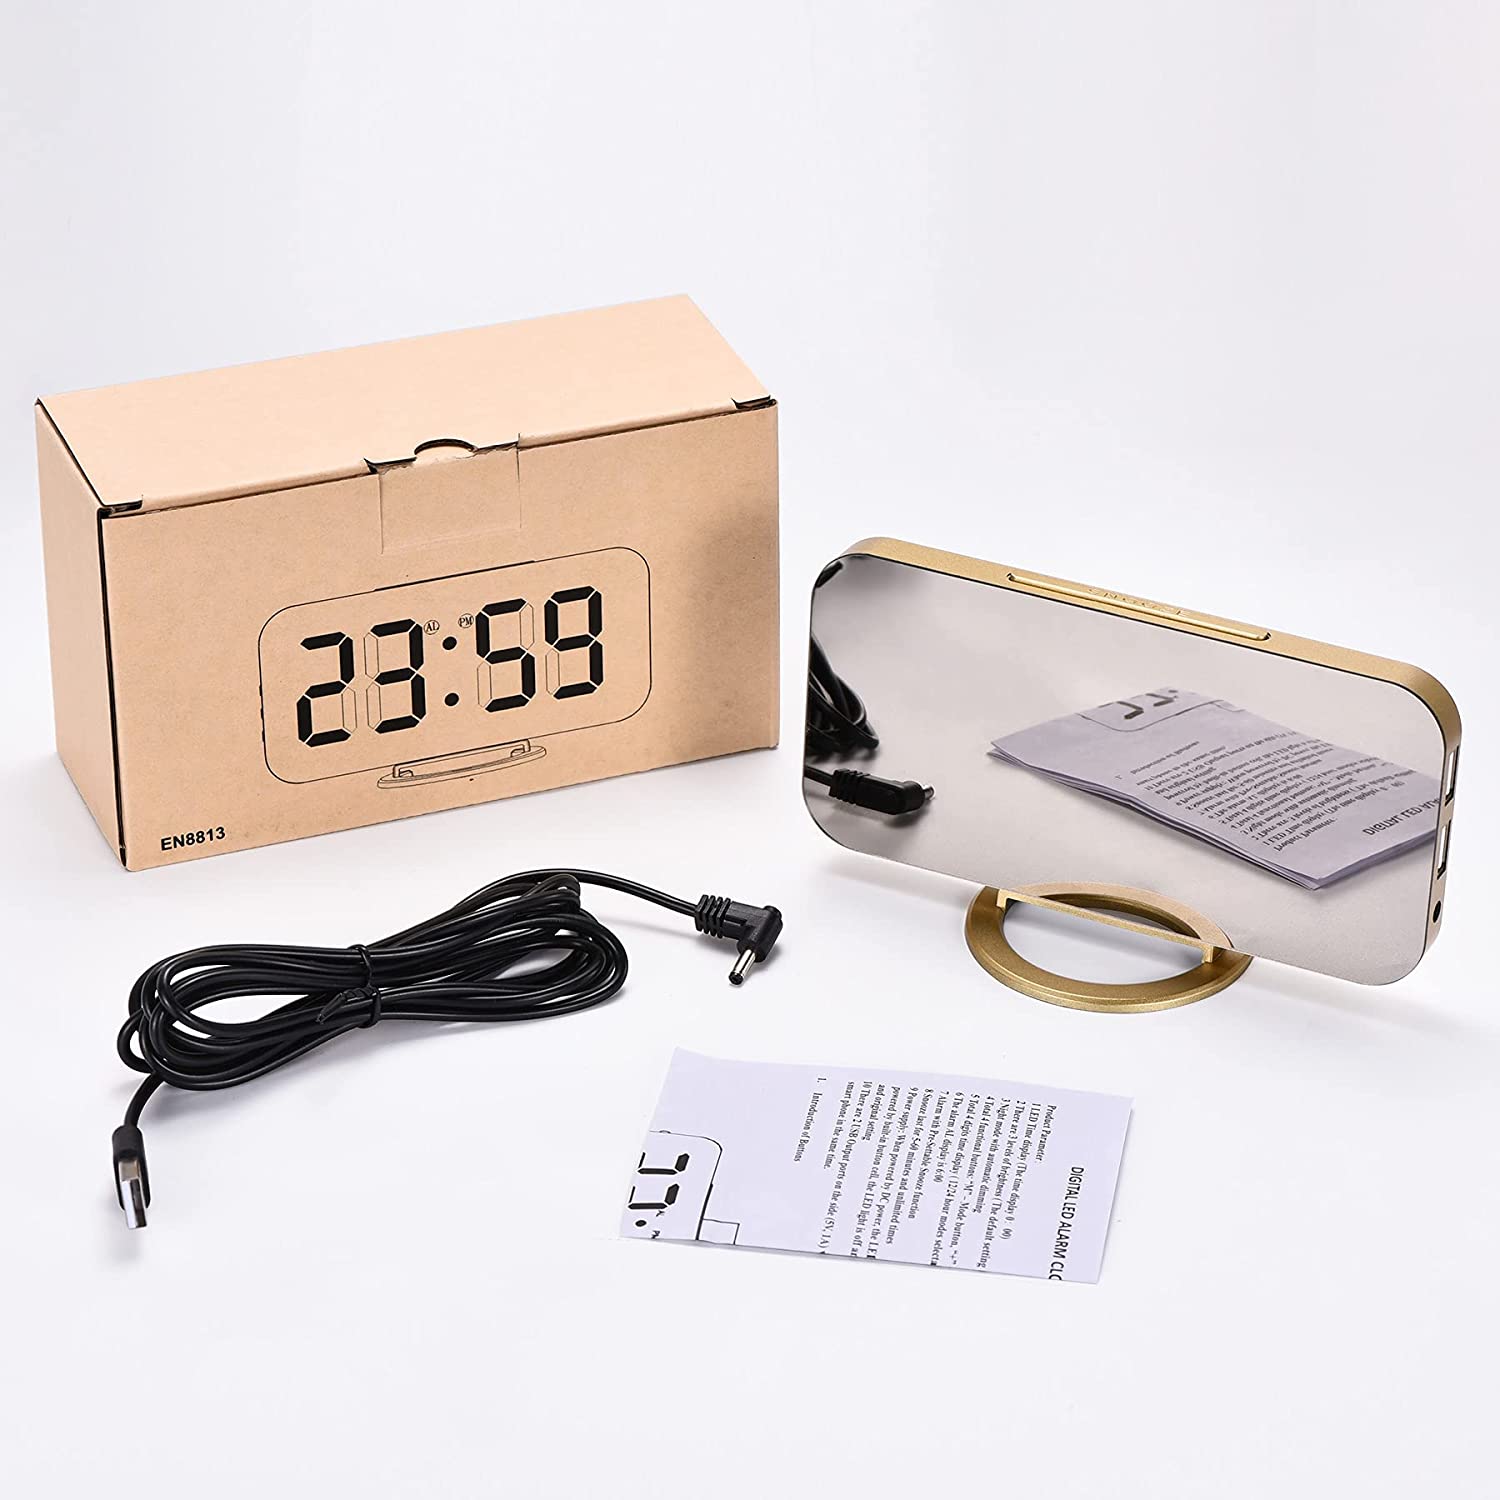 Digital Alarm Clock,6.5 Inch LED Mirror Electronic Clocks,with 2 USB Charging Ports,3 Adjustable Brightness,Snooze,12/24H,for Bedroom Home Office(Gold)